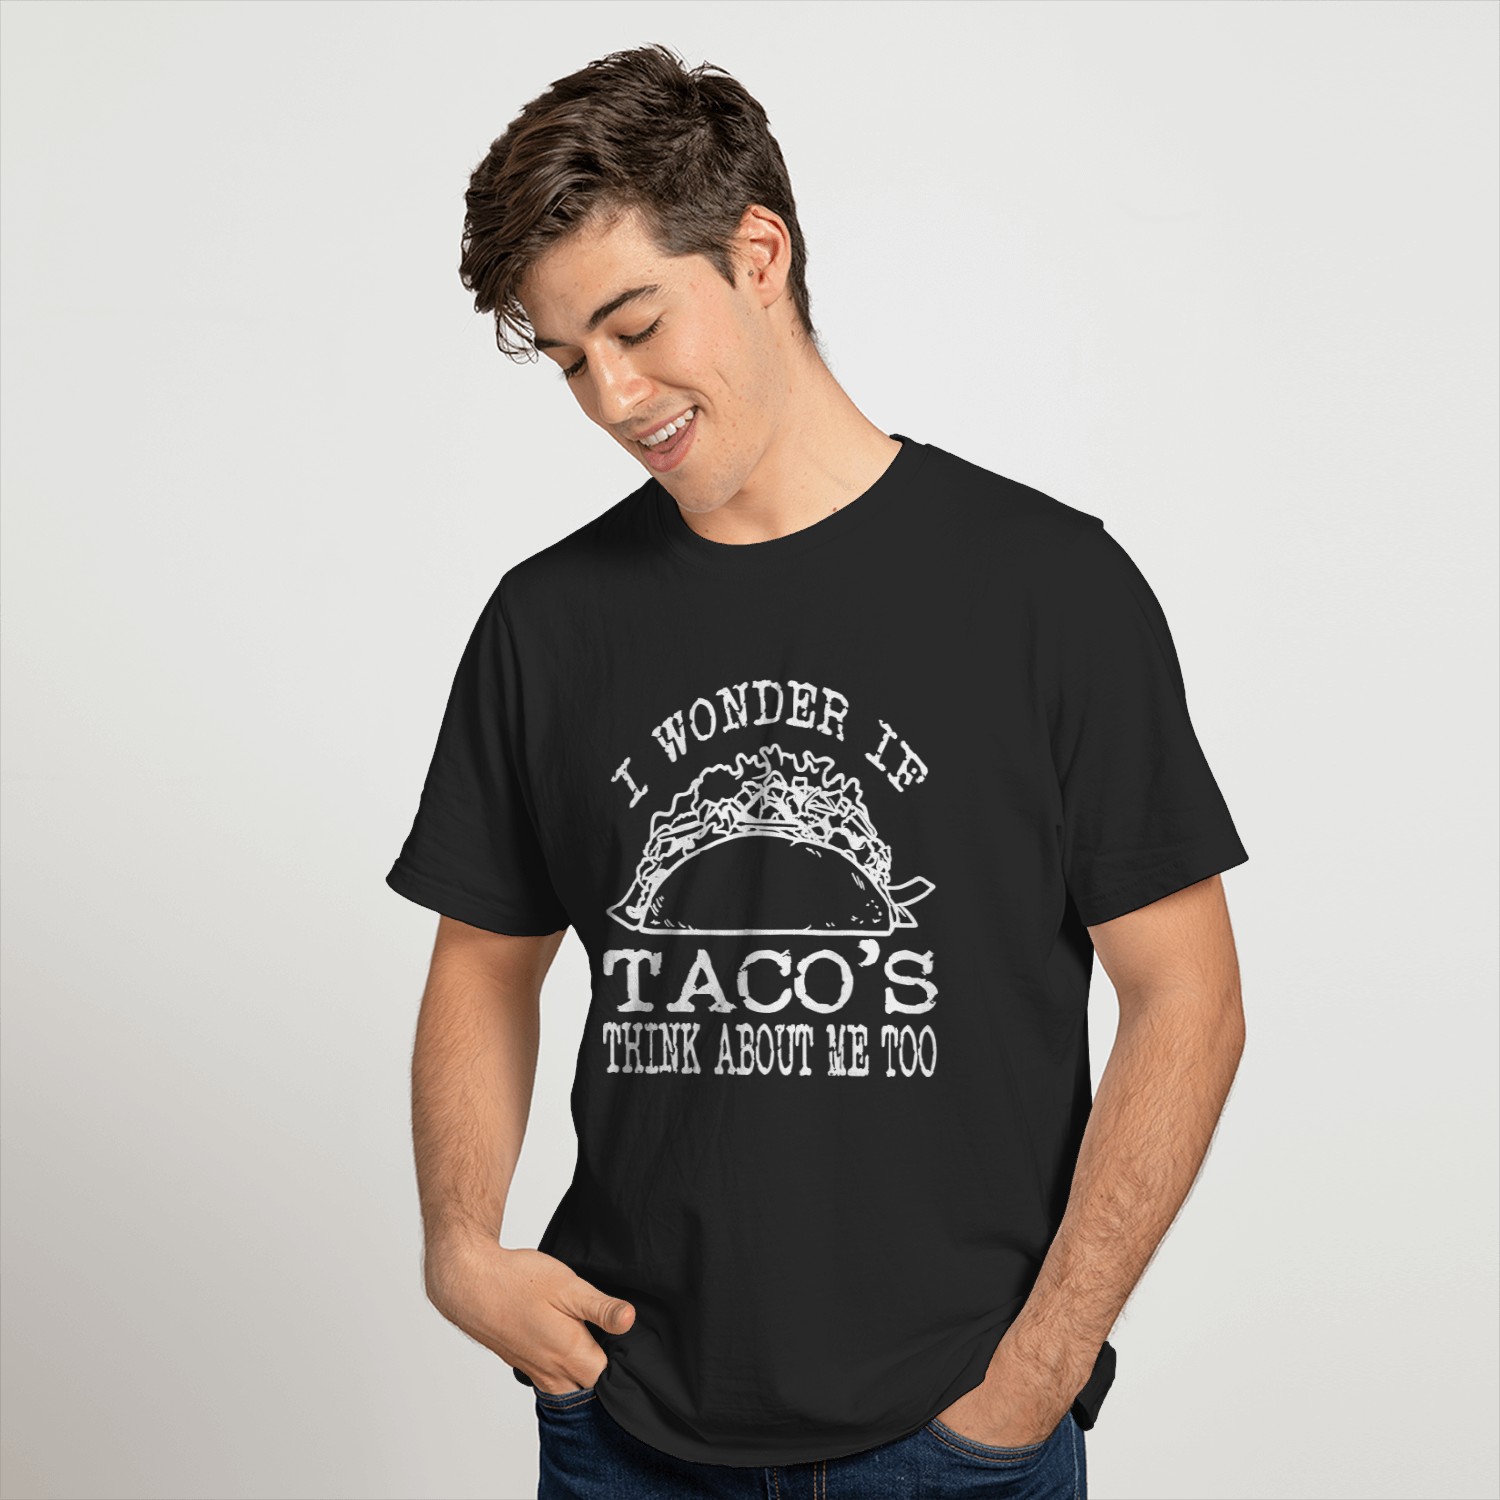 I Wonder If Tacos Think About Me Too T-Shirt